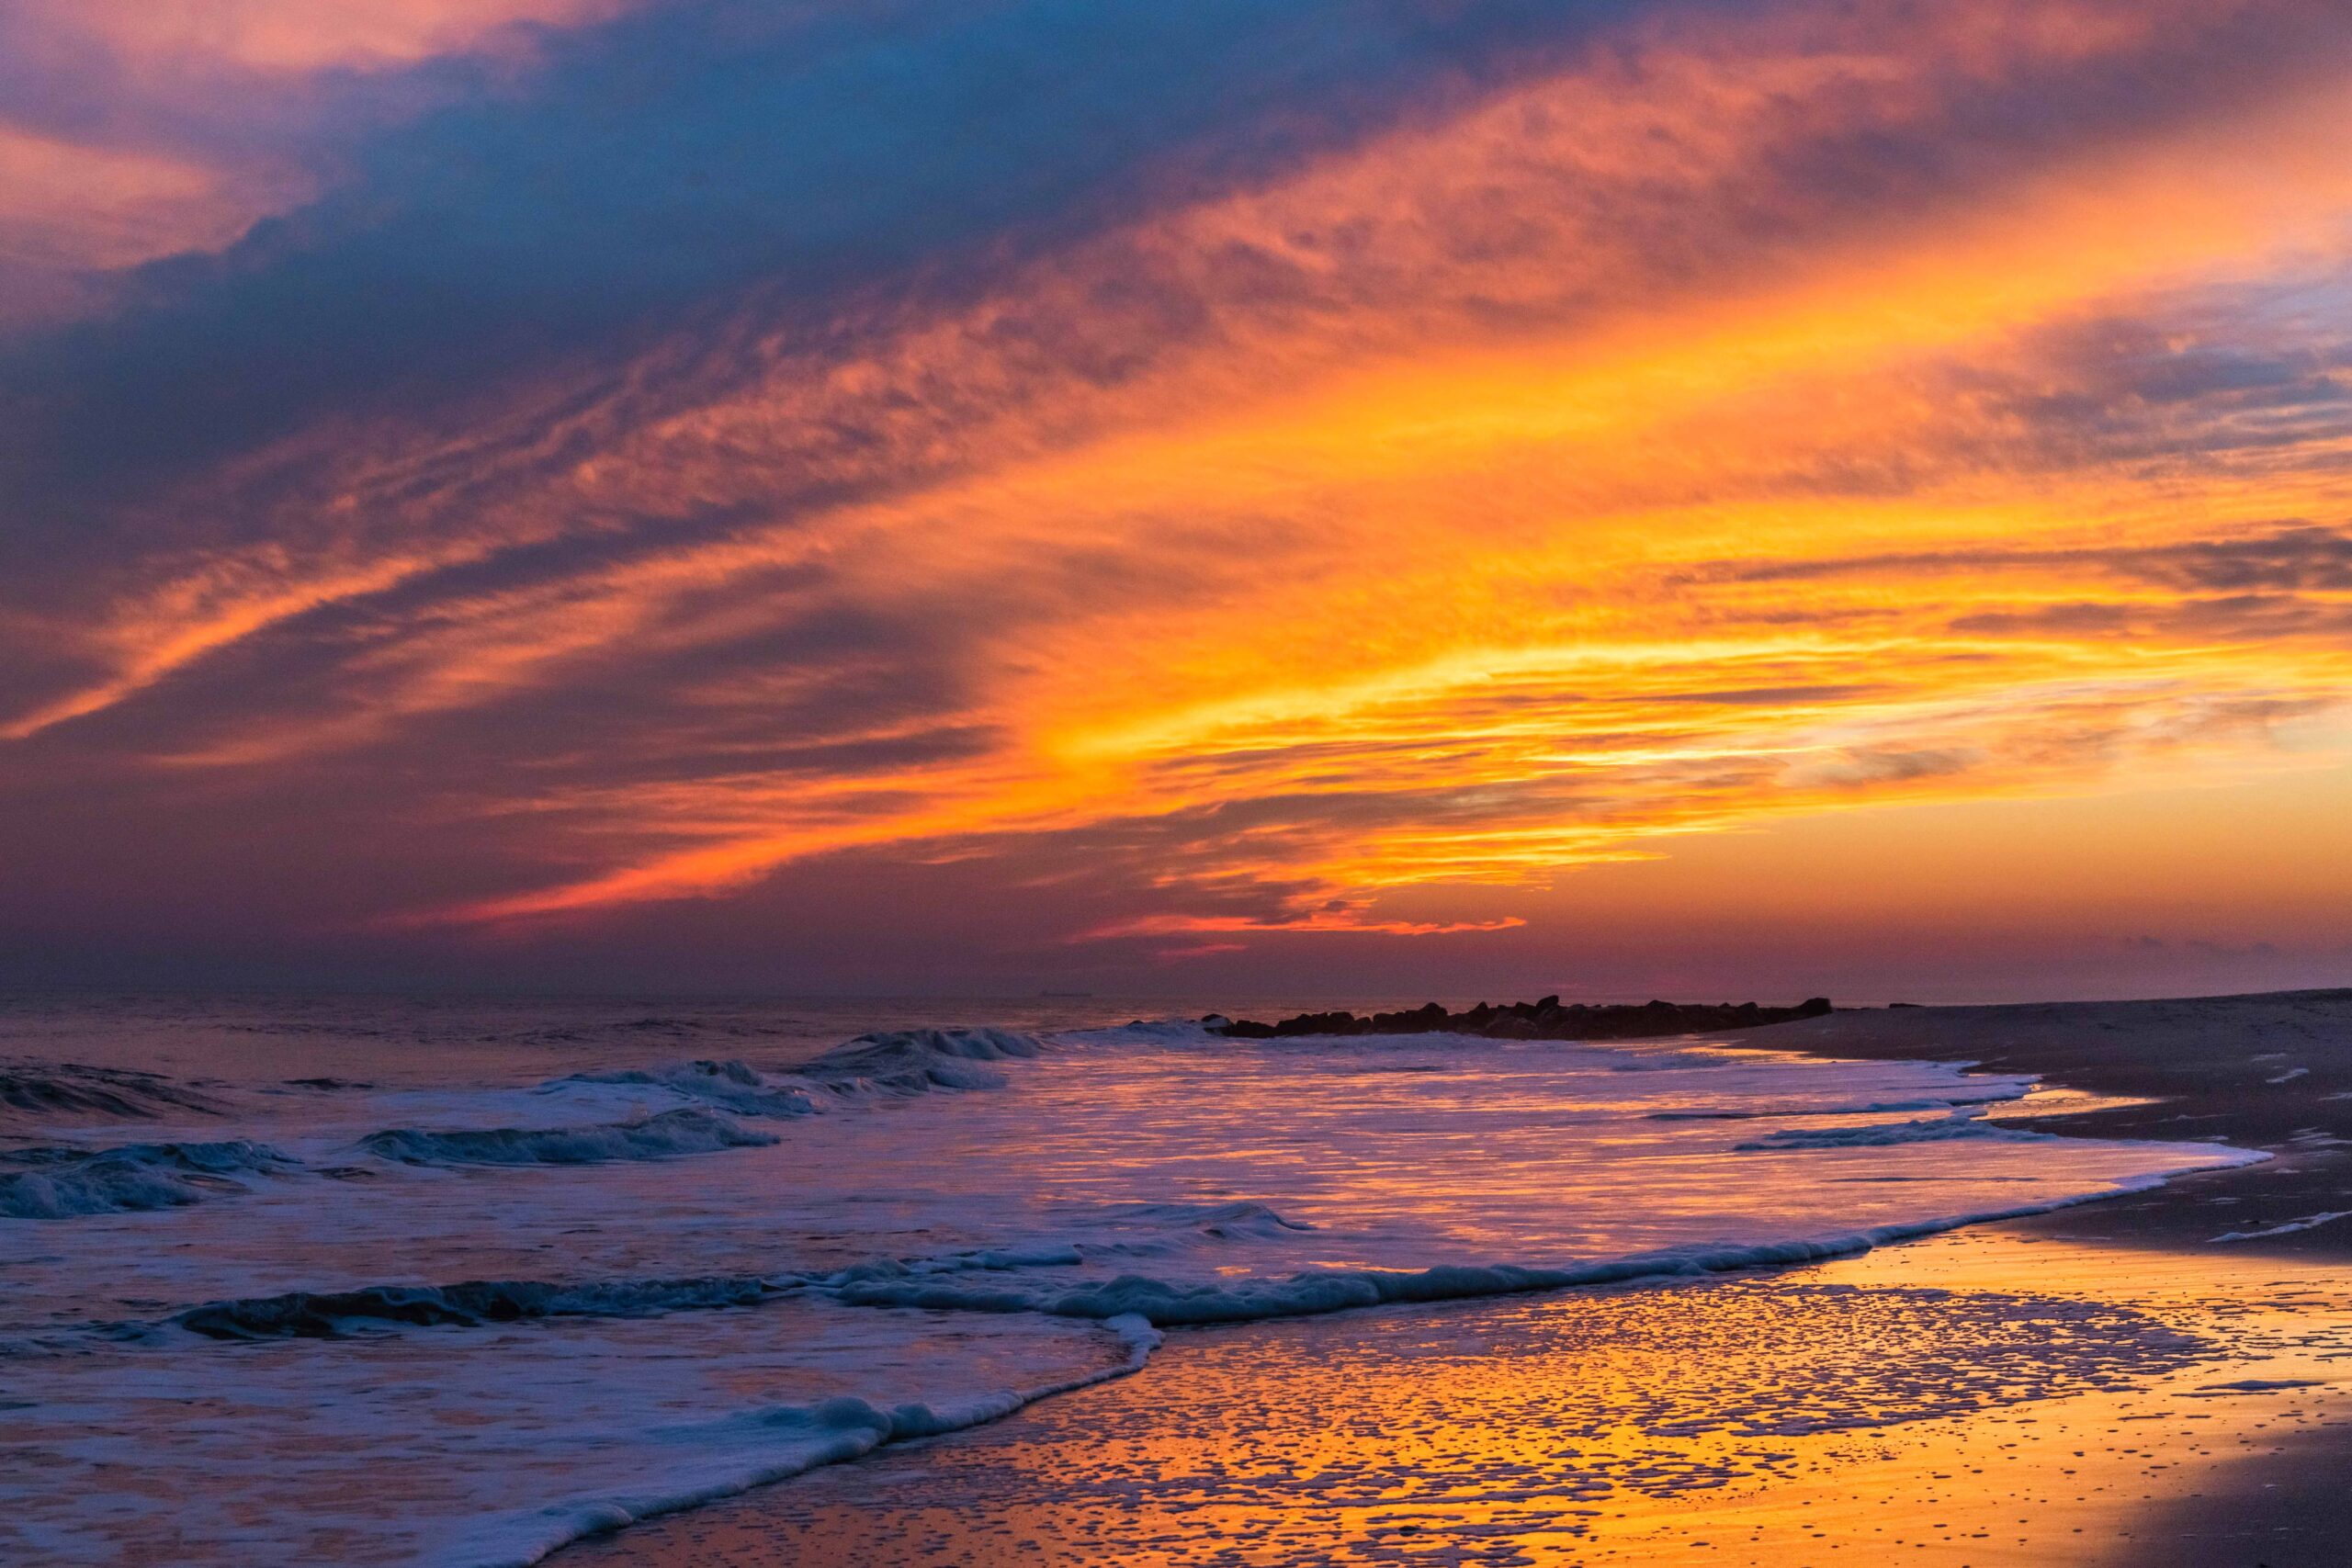 Orange, pink, and blue clouds in the sky at sunset with the colors reflected in the ocean at the beach